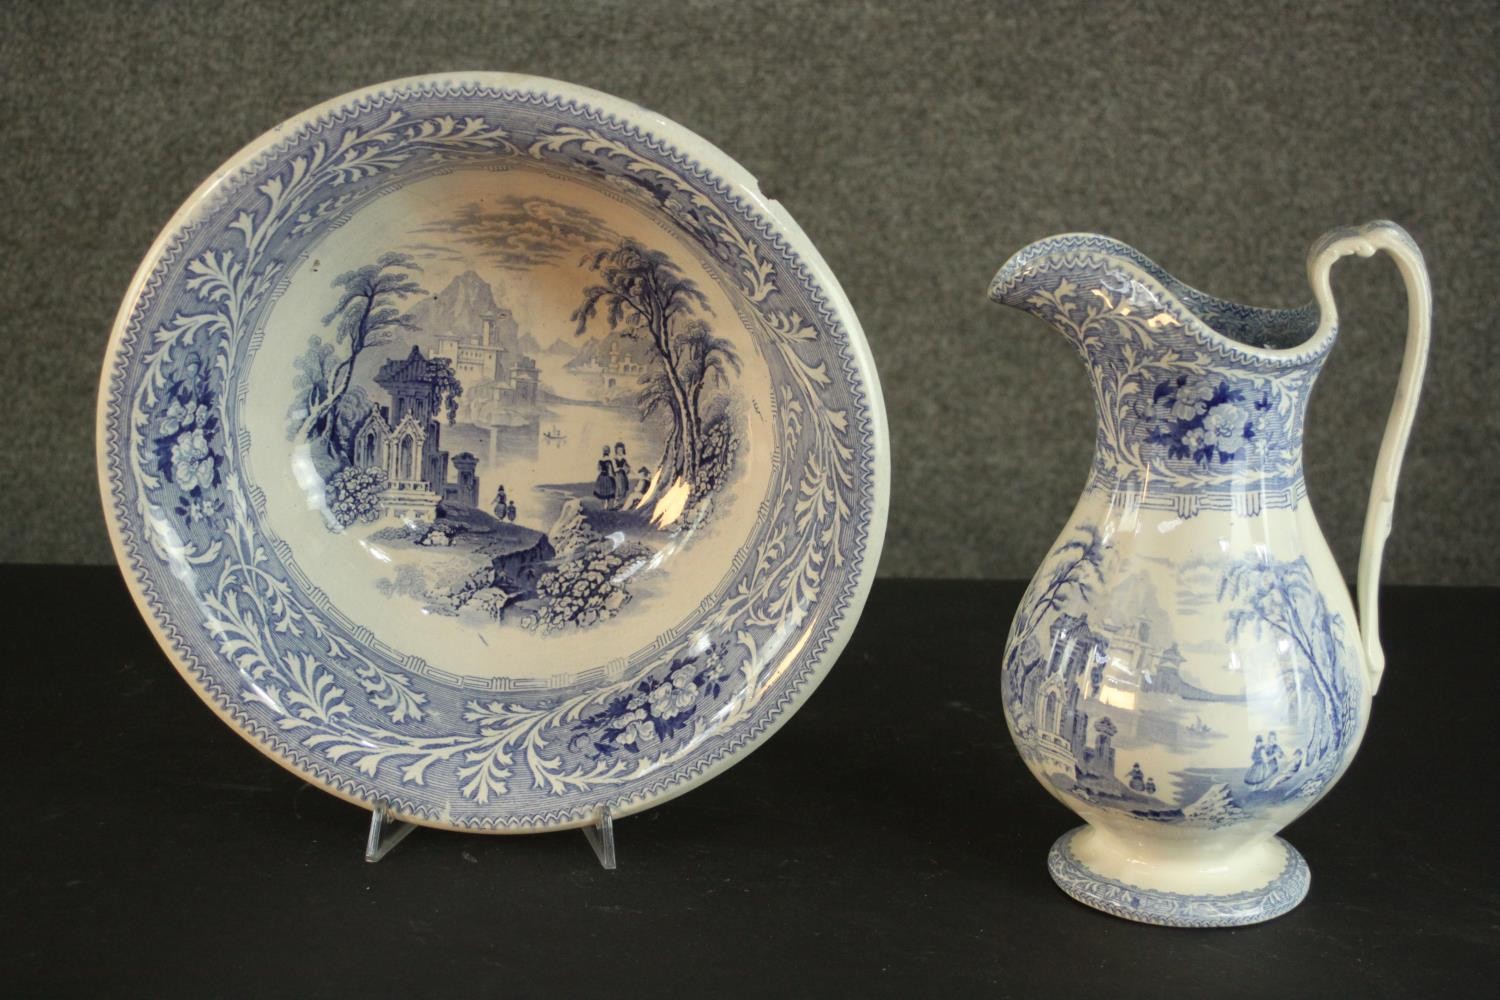 A Victorian Staffordshire blue and white china wash jug and basin, transfer printed with fantastical